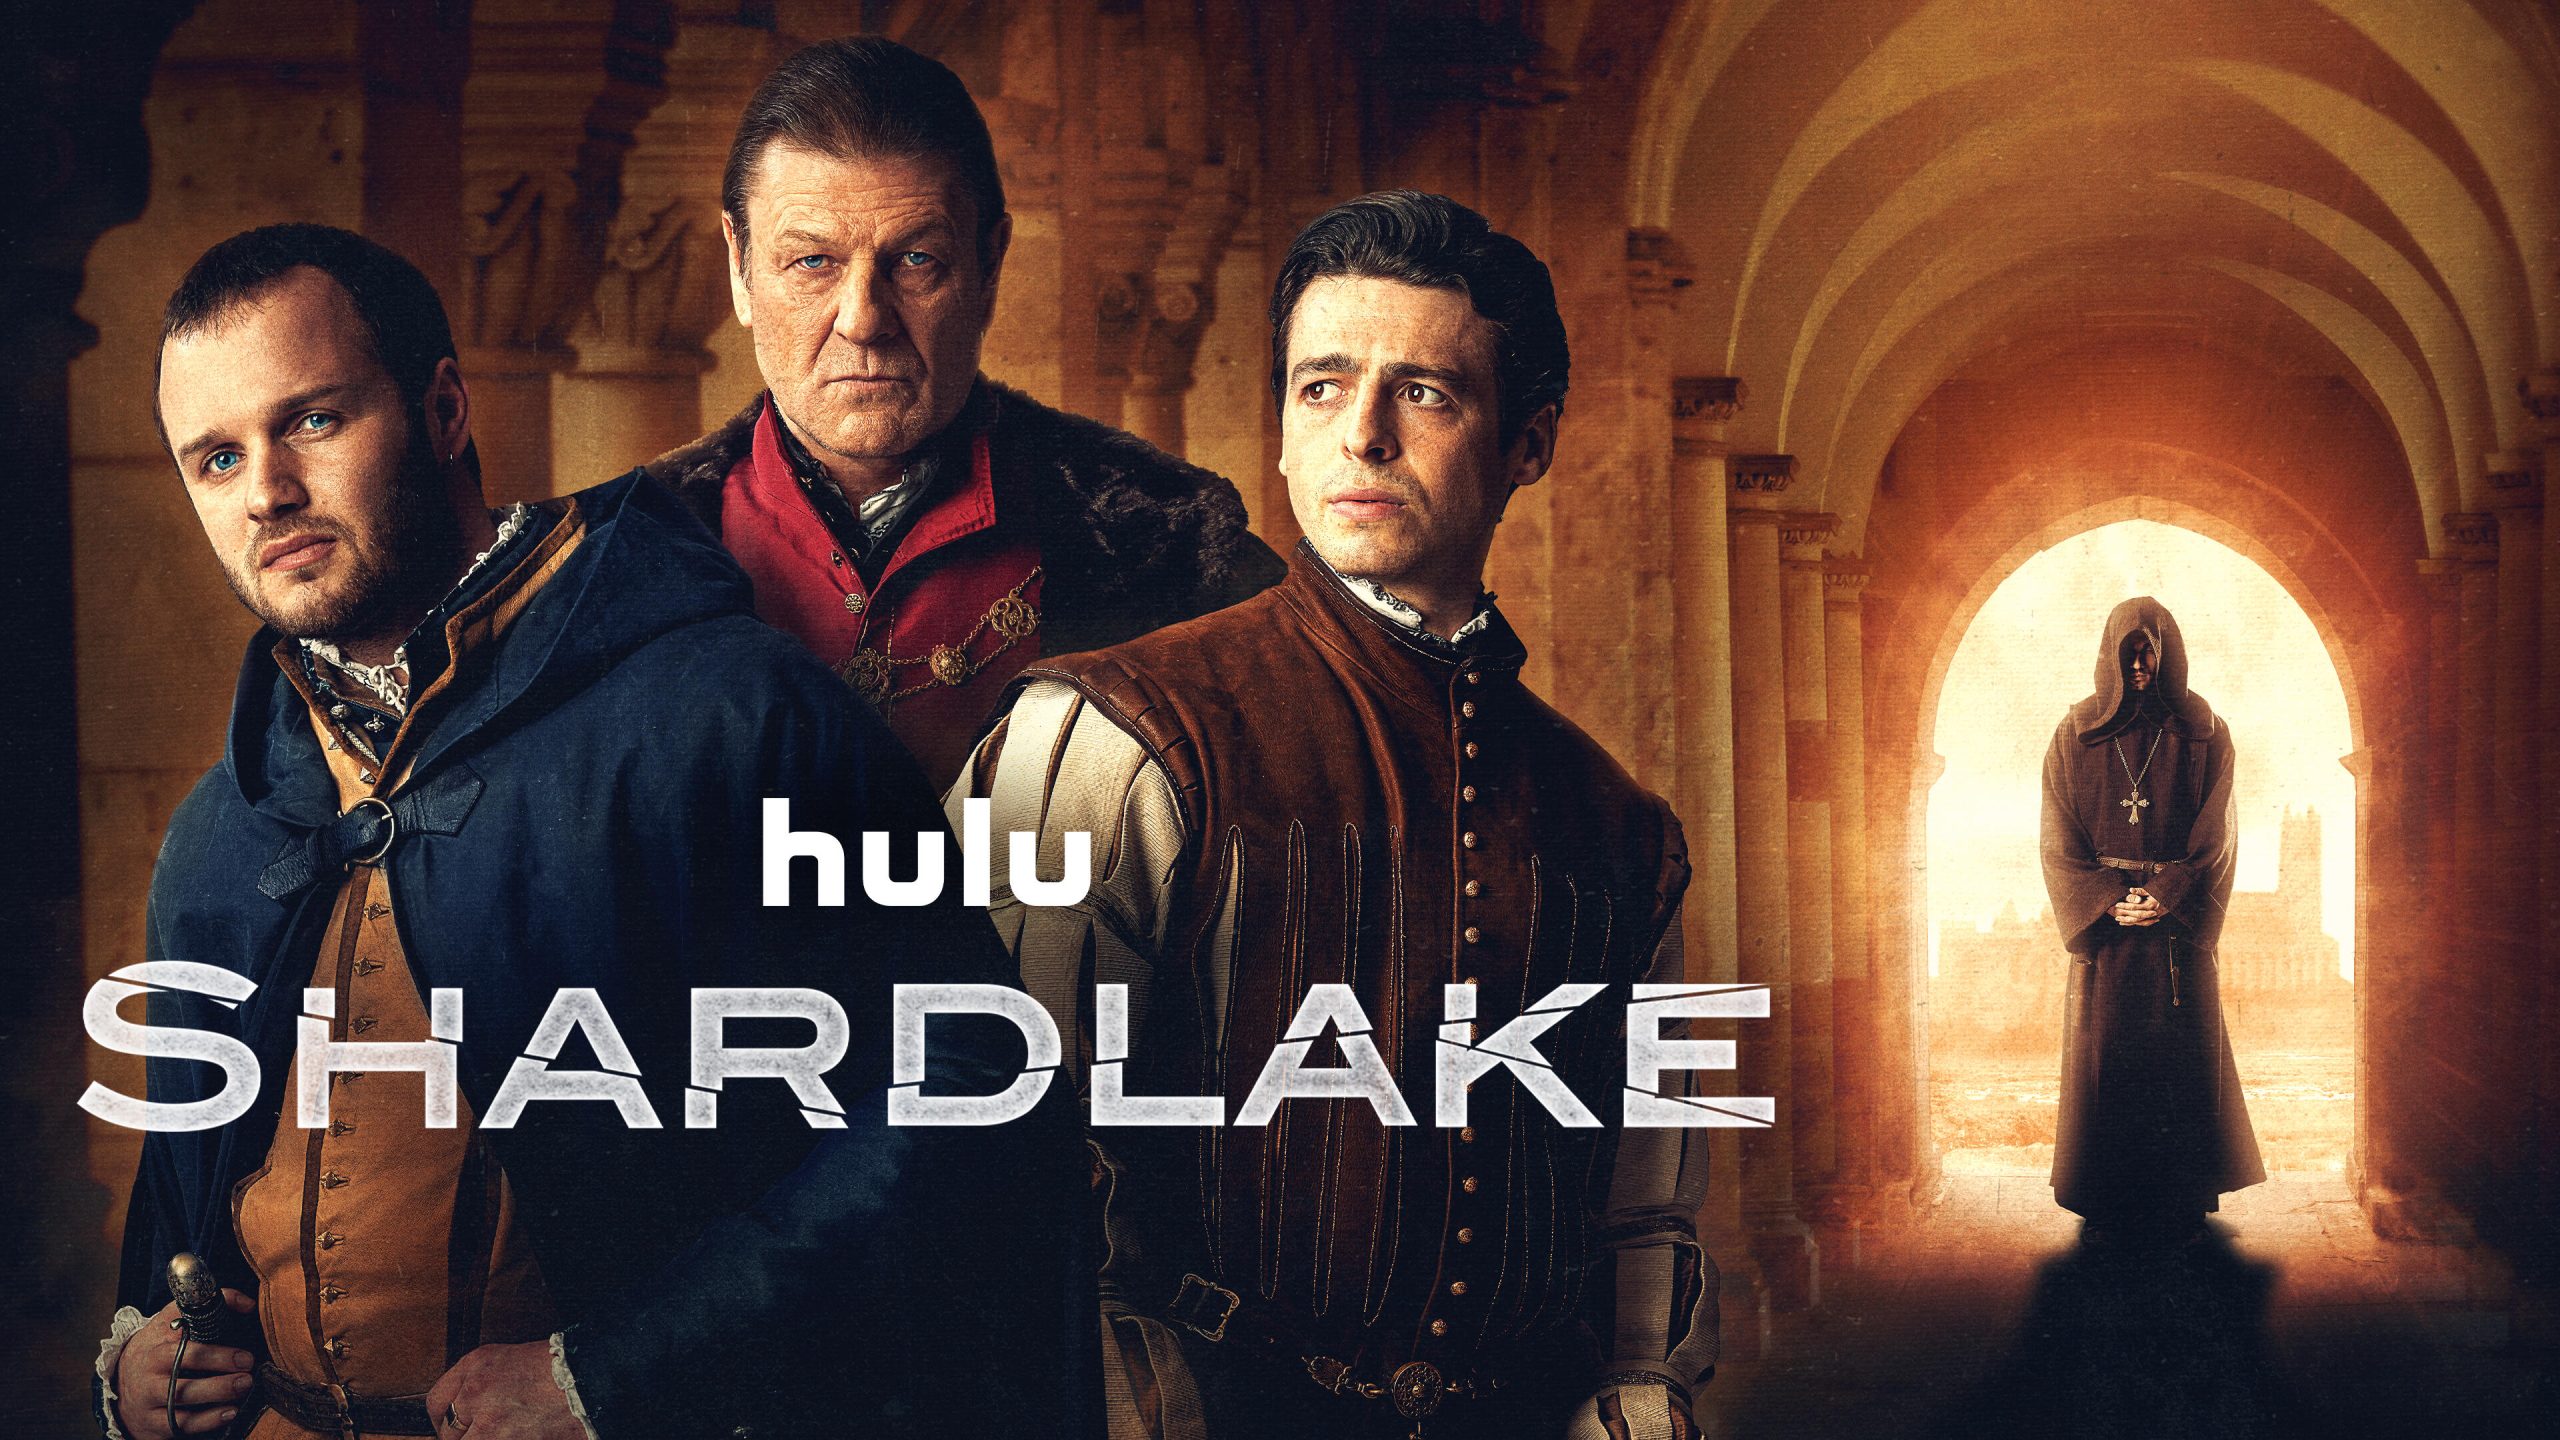 Shardlake -- Season 1 -- Drenched in mystery, suspense and deception, this four-part drama, based on the first novel in C.J. Sansom’s internationally popular Tudor murder mystery series, is an eerie whodunnit adventure, set in 16th century England during the dissolution of the monasteries. Shardlake’s sheltered life as a lawyer is turned upside down when Cromwell instructs him to investigate the murder of one of his commissioners at a monastery in the remote town of Scarnsea. (Courtesy of Disney+)